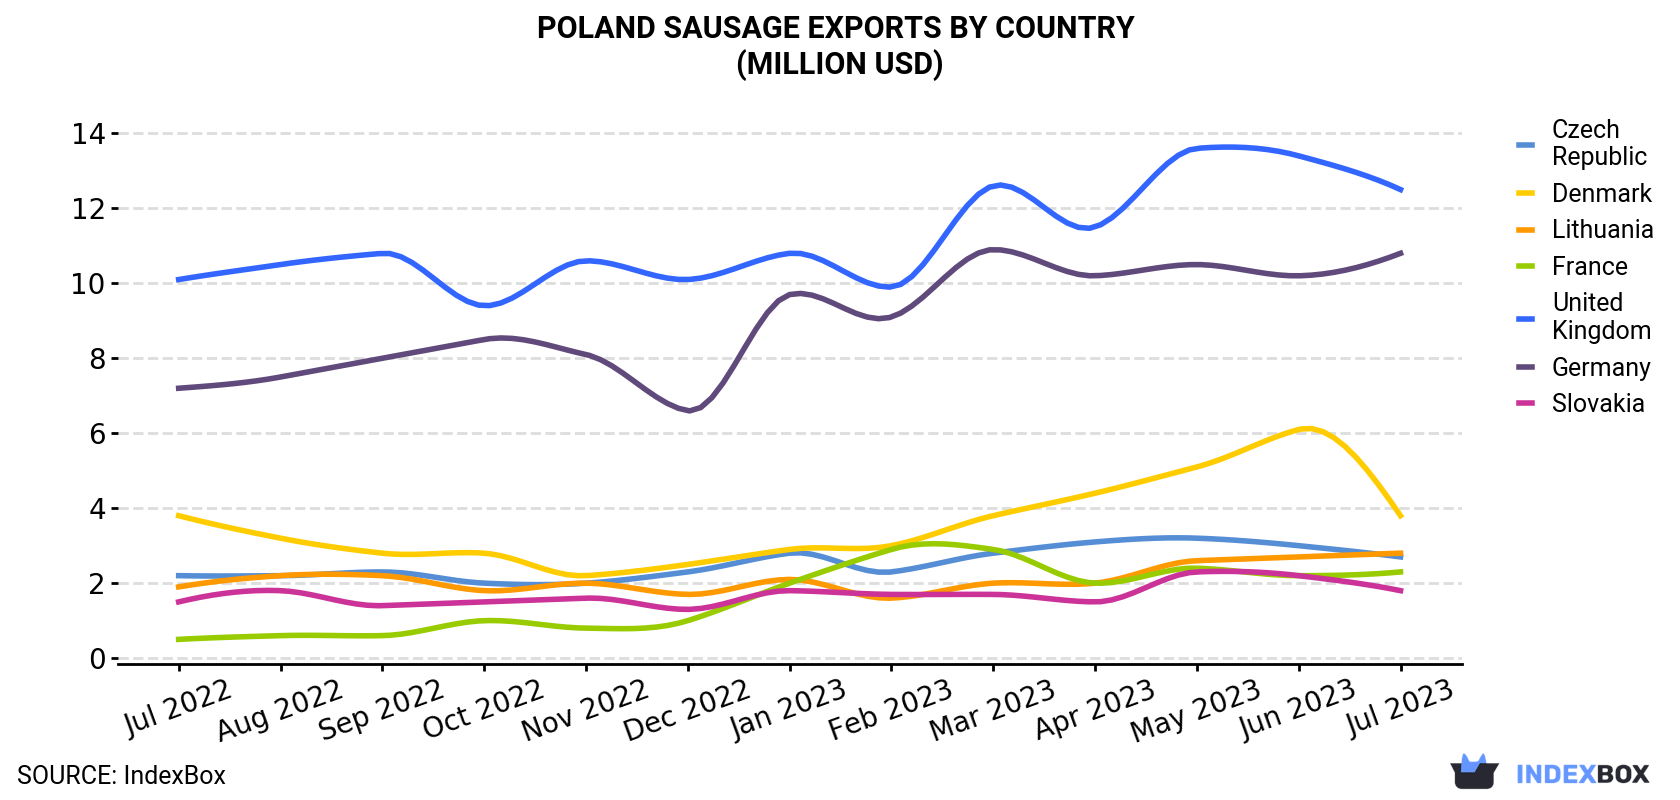 Poland Sausage Exports By Country (Million USD)